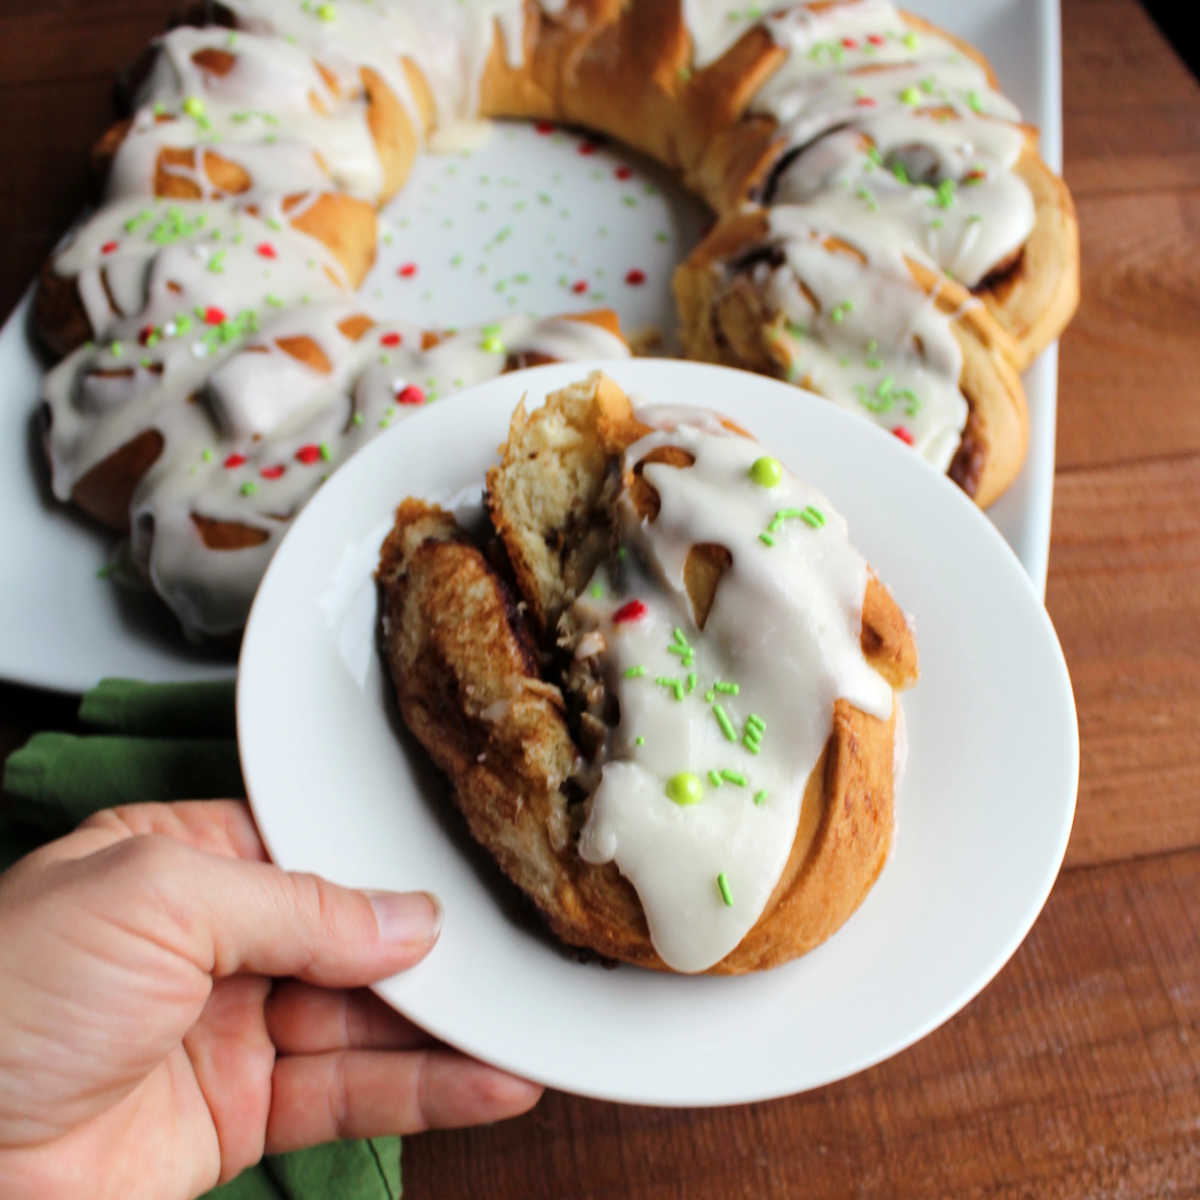 hand holding cinnamon roll on plate with remaining cinnamon roll wreath in background.